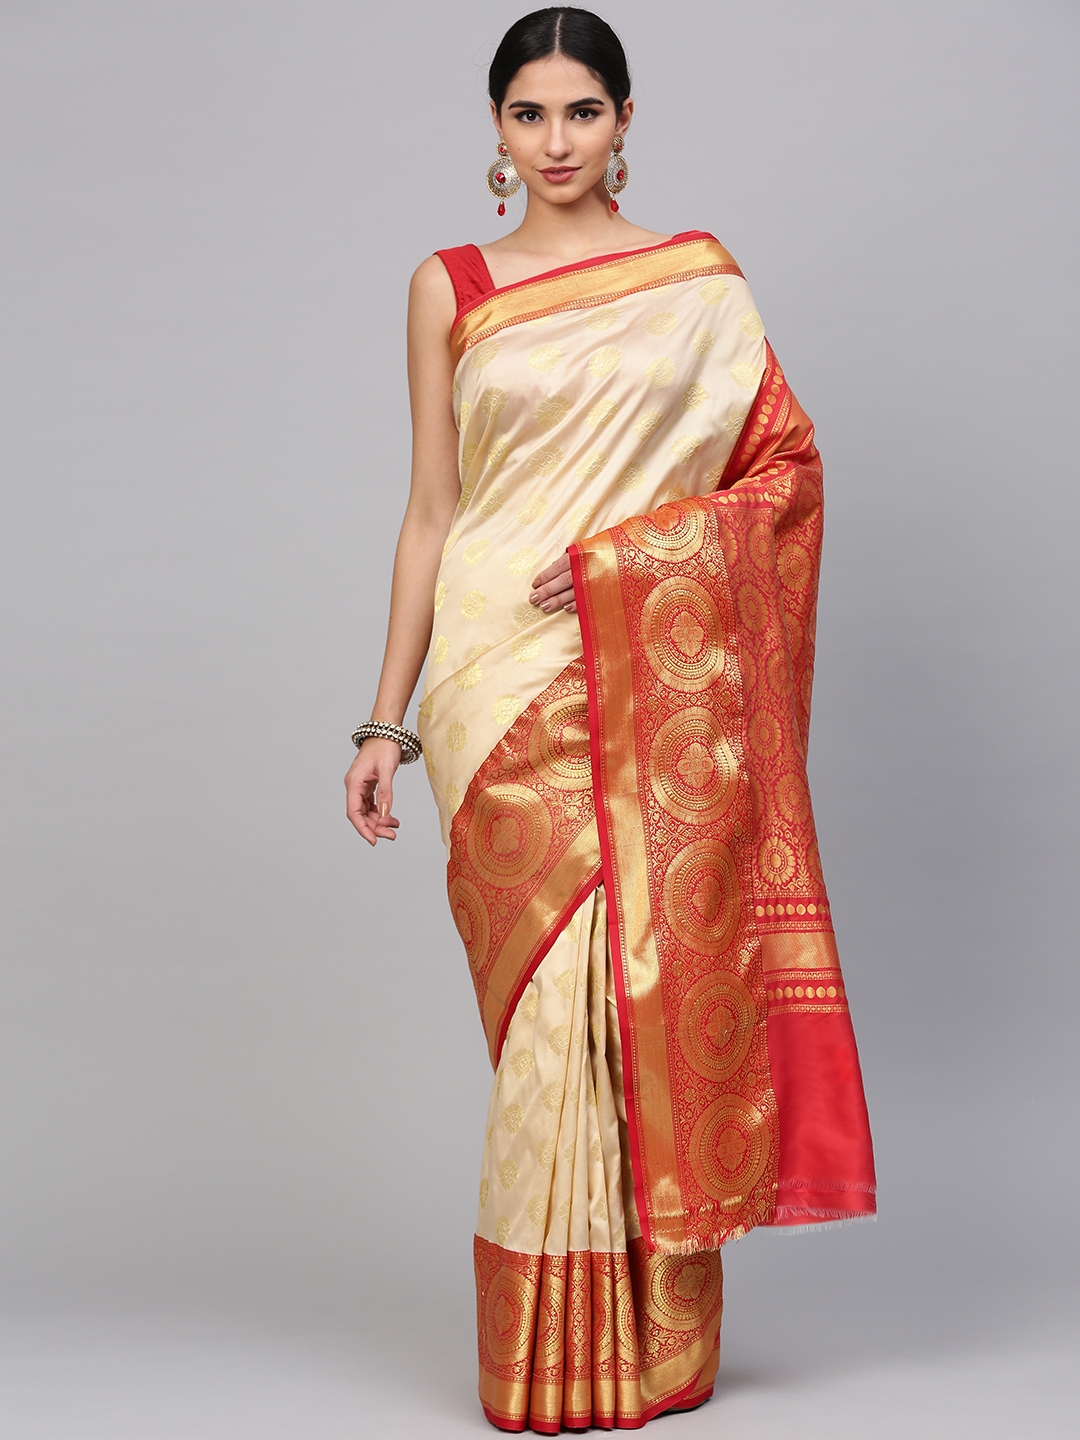 21 Regional Sarees of India You Should Have In Your Wardrobe - Latest  Fashion News, New Trends